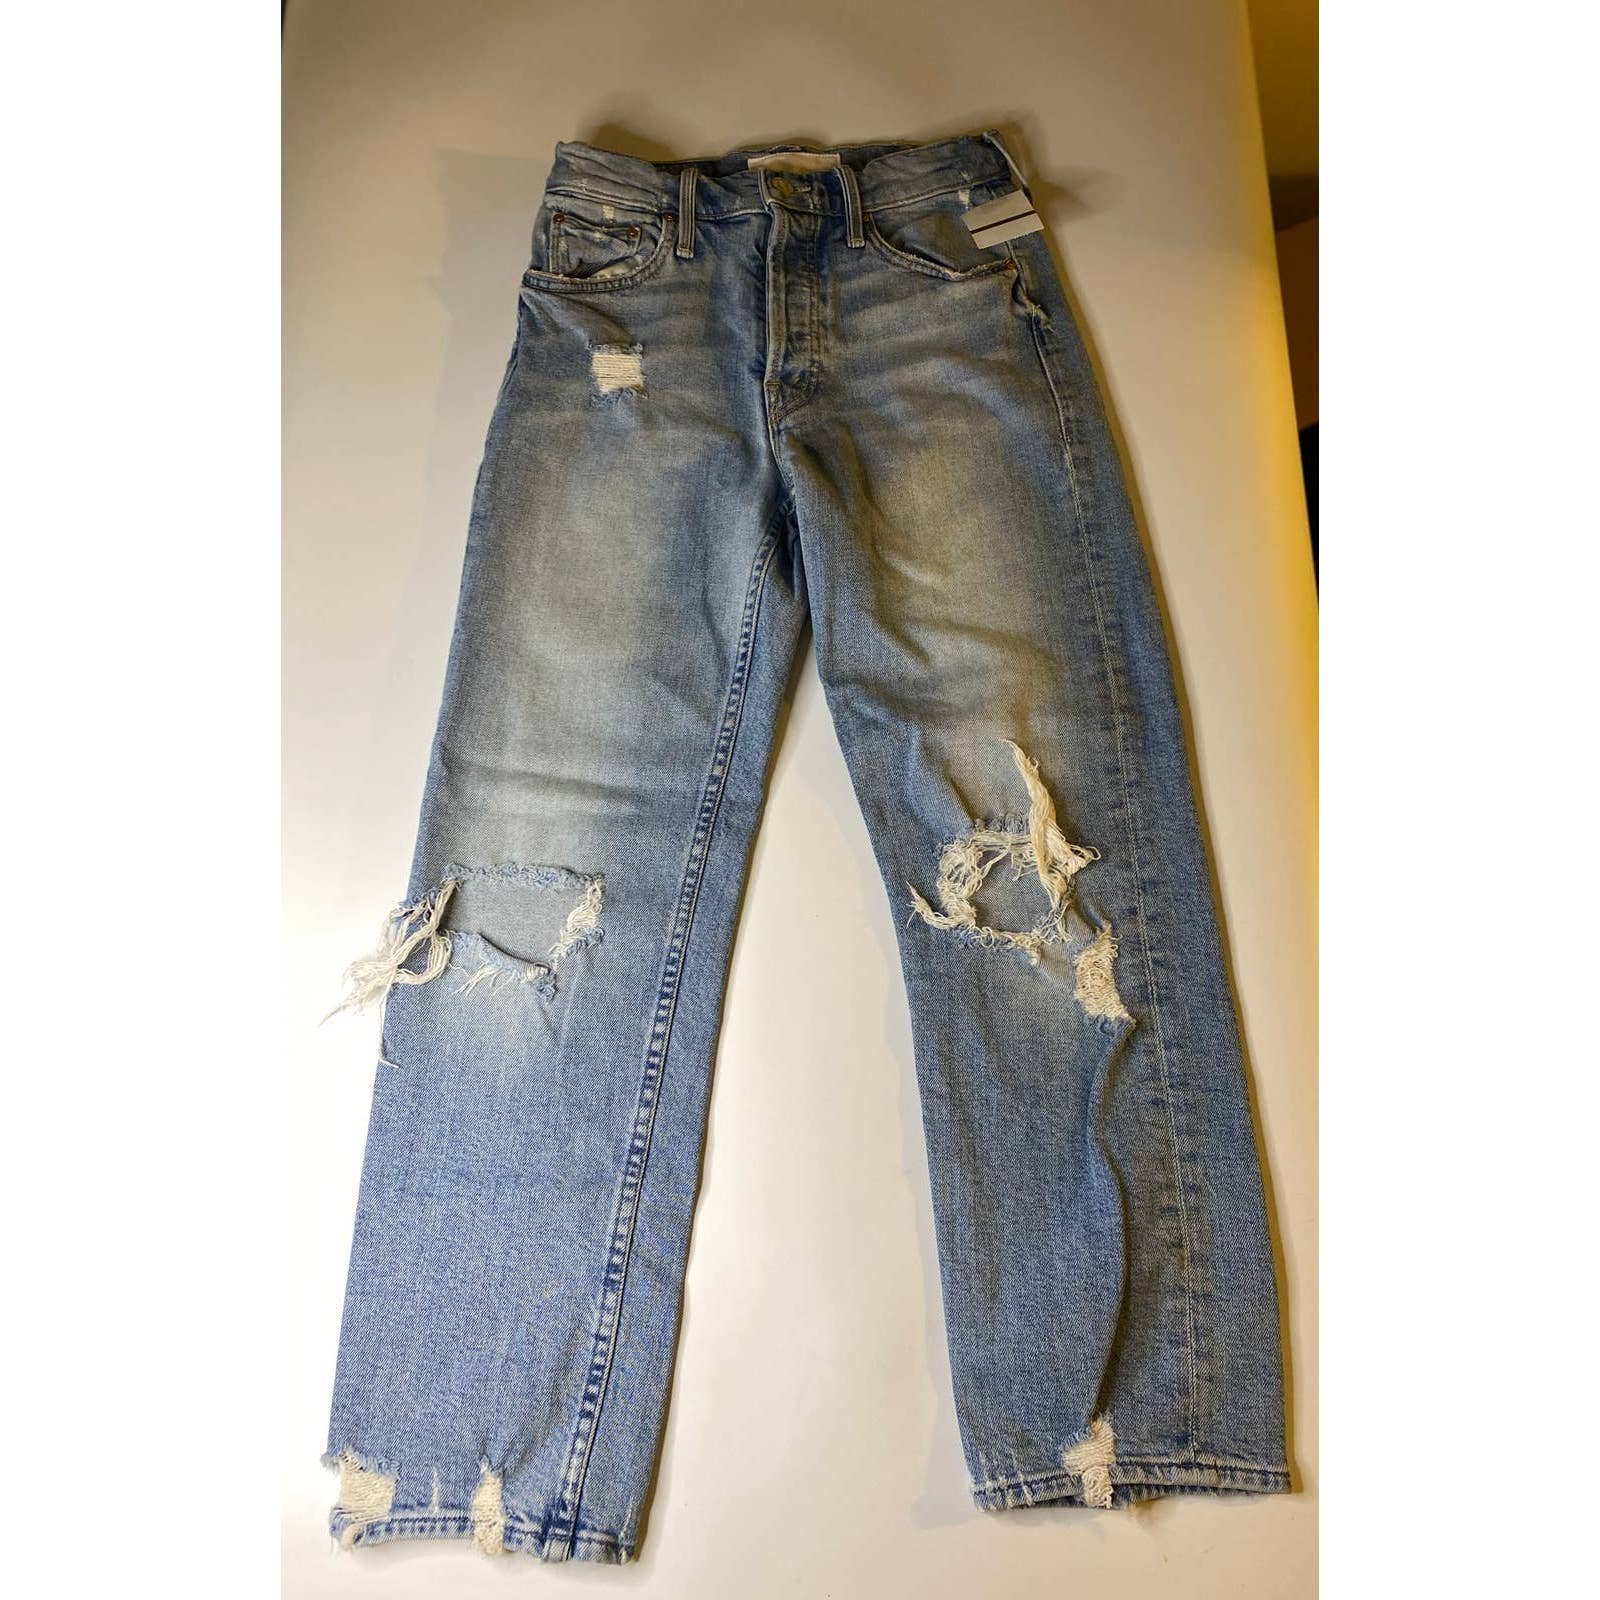 Stylish MOTHER SUPERIOR The Tomcat High-Rise Distressed Jeans Womens Size 25 PmXO7uXcl on sale